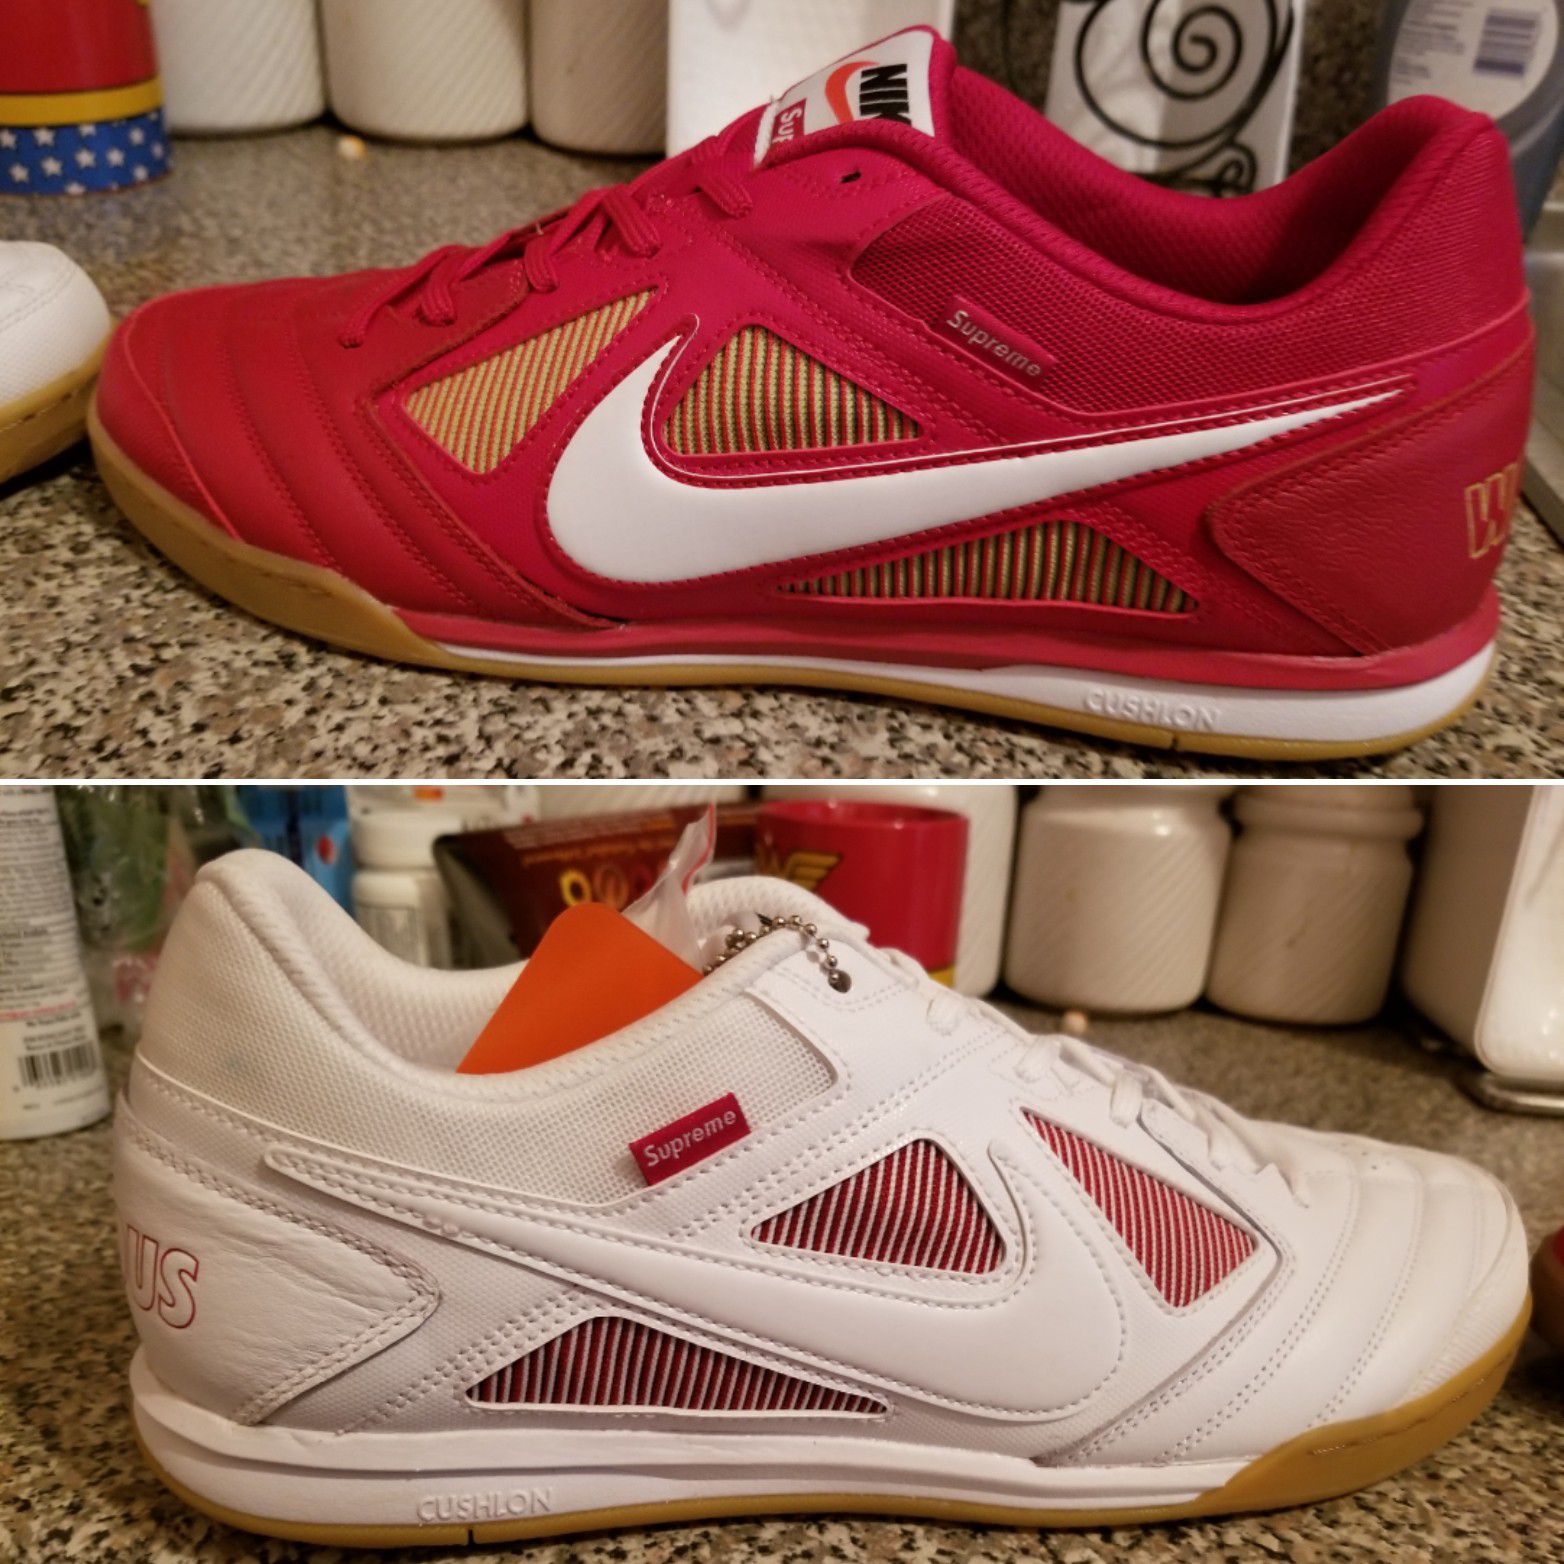 Nike x Supreme Gato - Red & White - Size 13 Sale in Brooklyn, NY - OfferUp